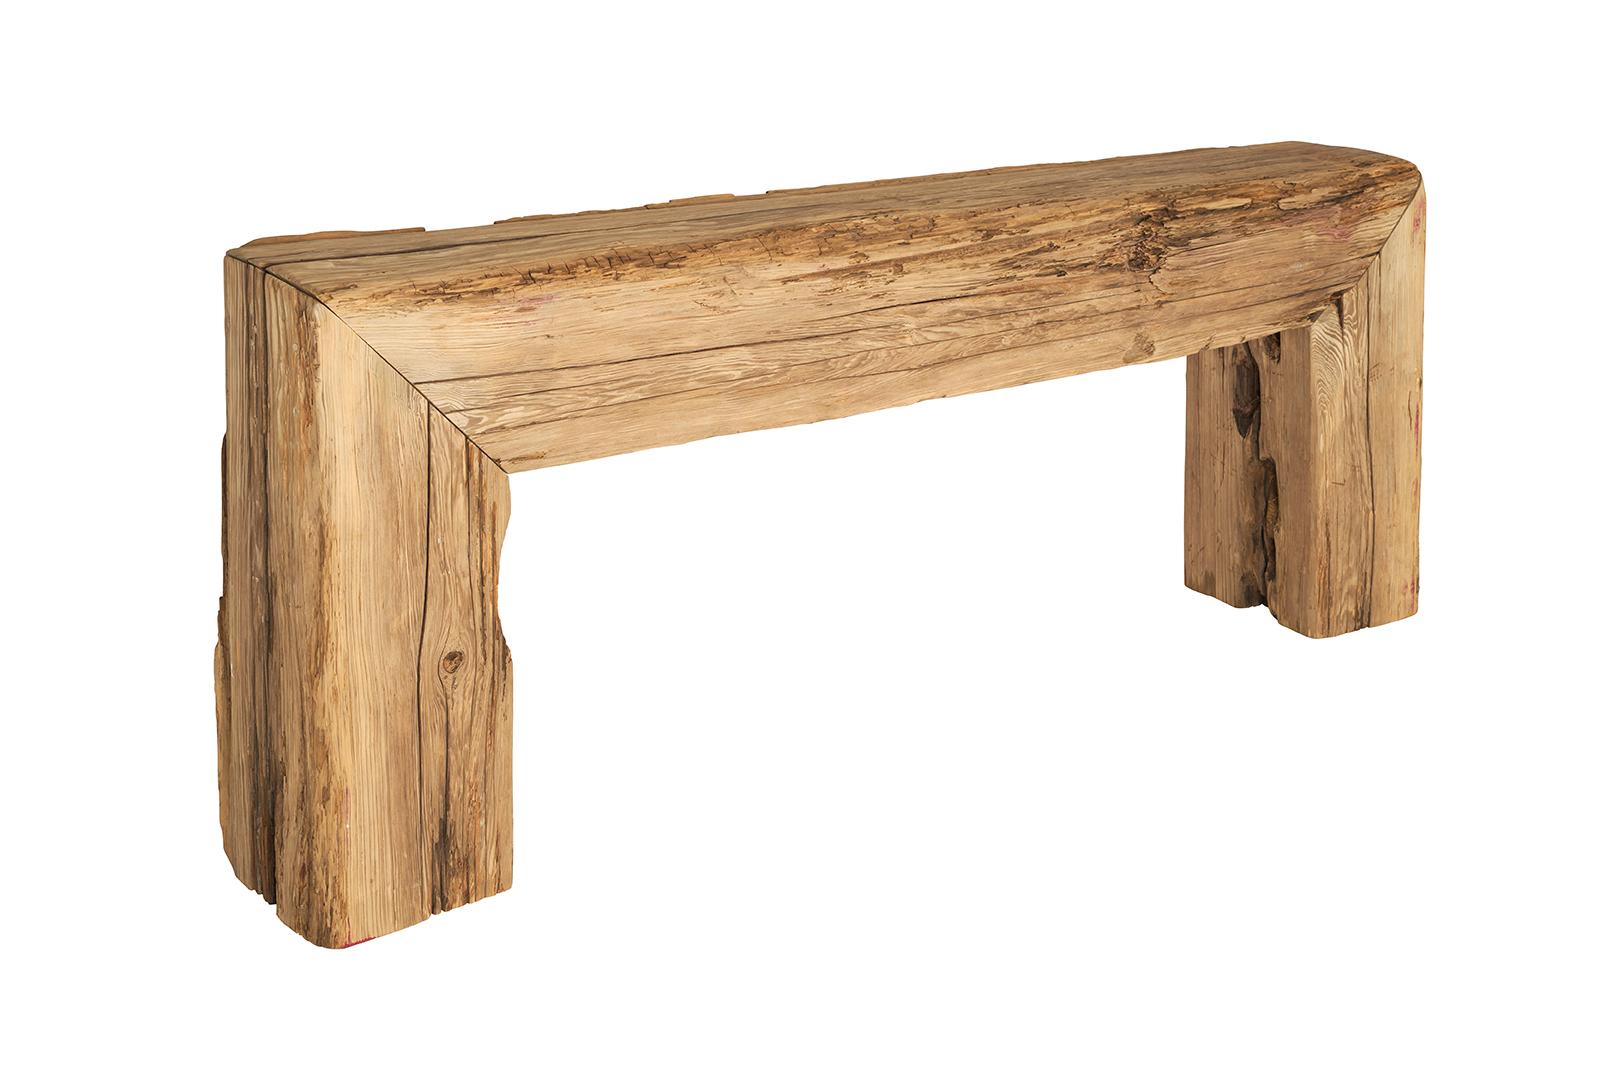 Organic Modern Console Made From Reclaimed Beam from Bass Family Farm Fishing Creek